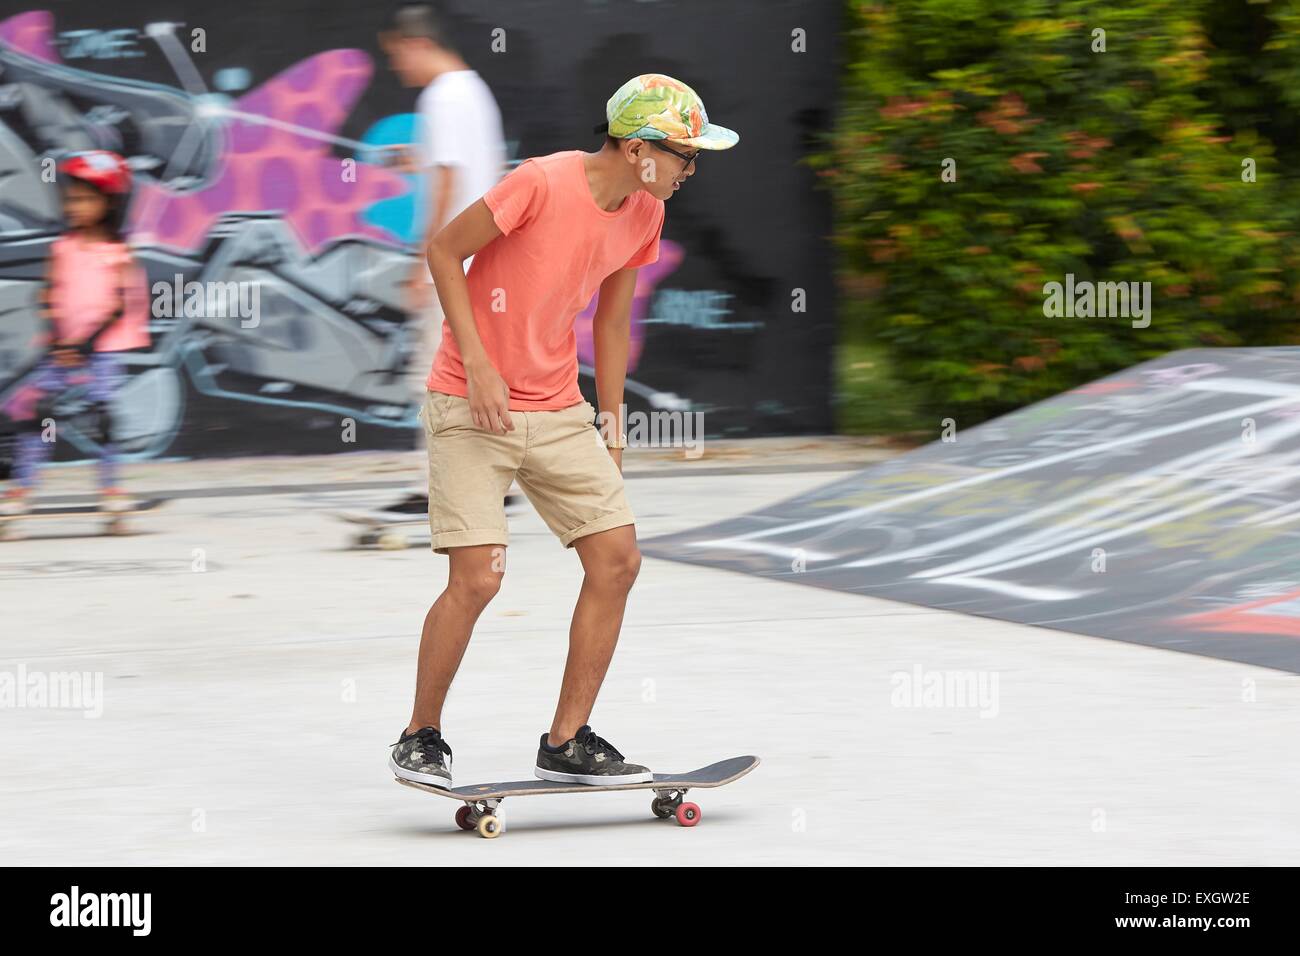 Young Singaporean Man Skateboarding in the SCAPE Skate Park, Singapore. Stock Photo